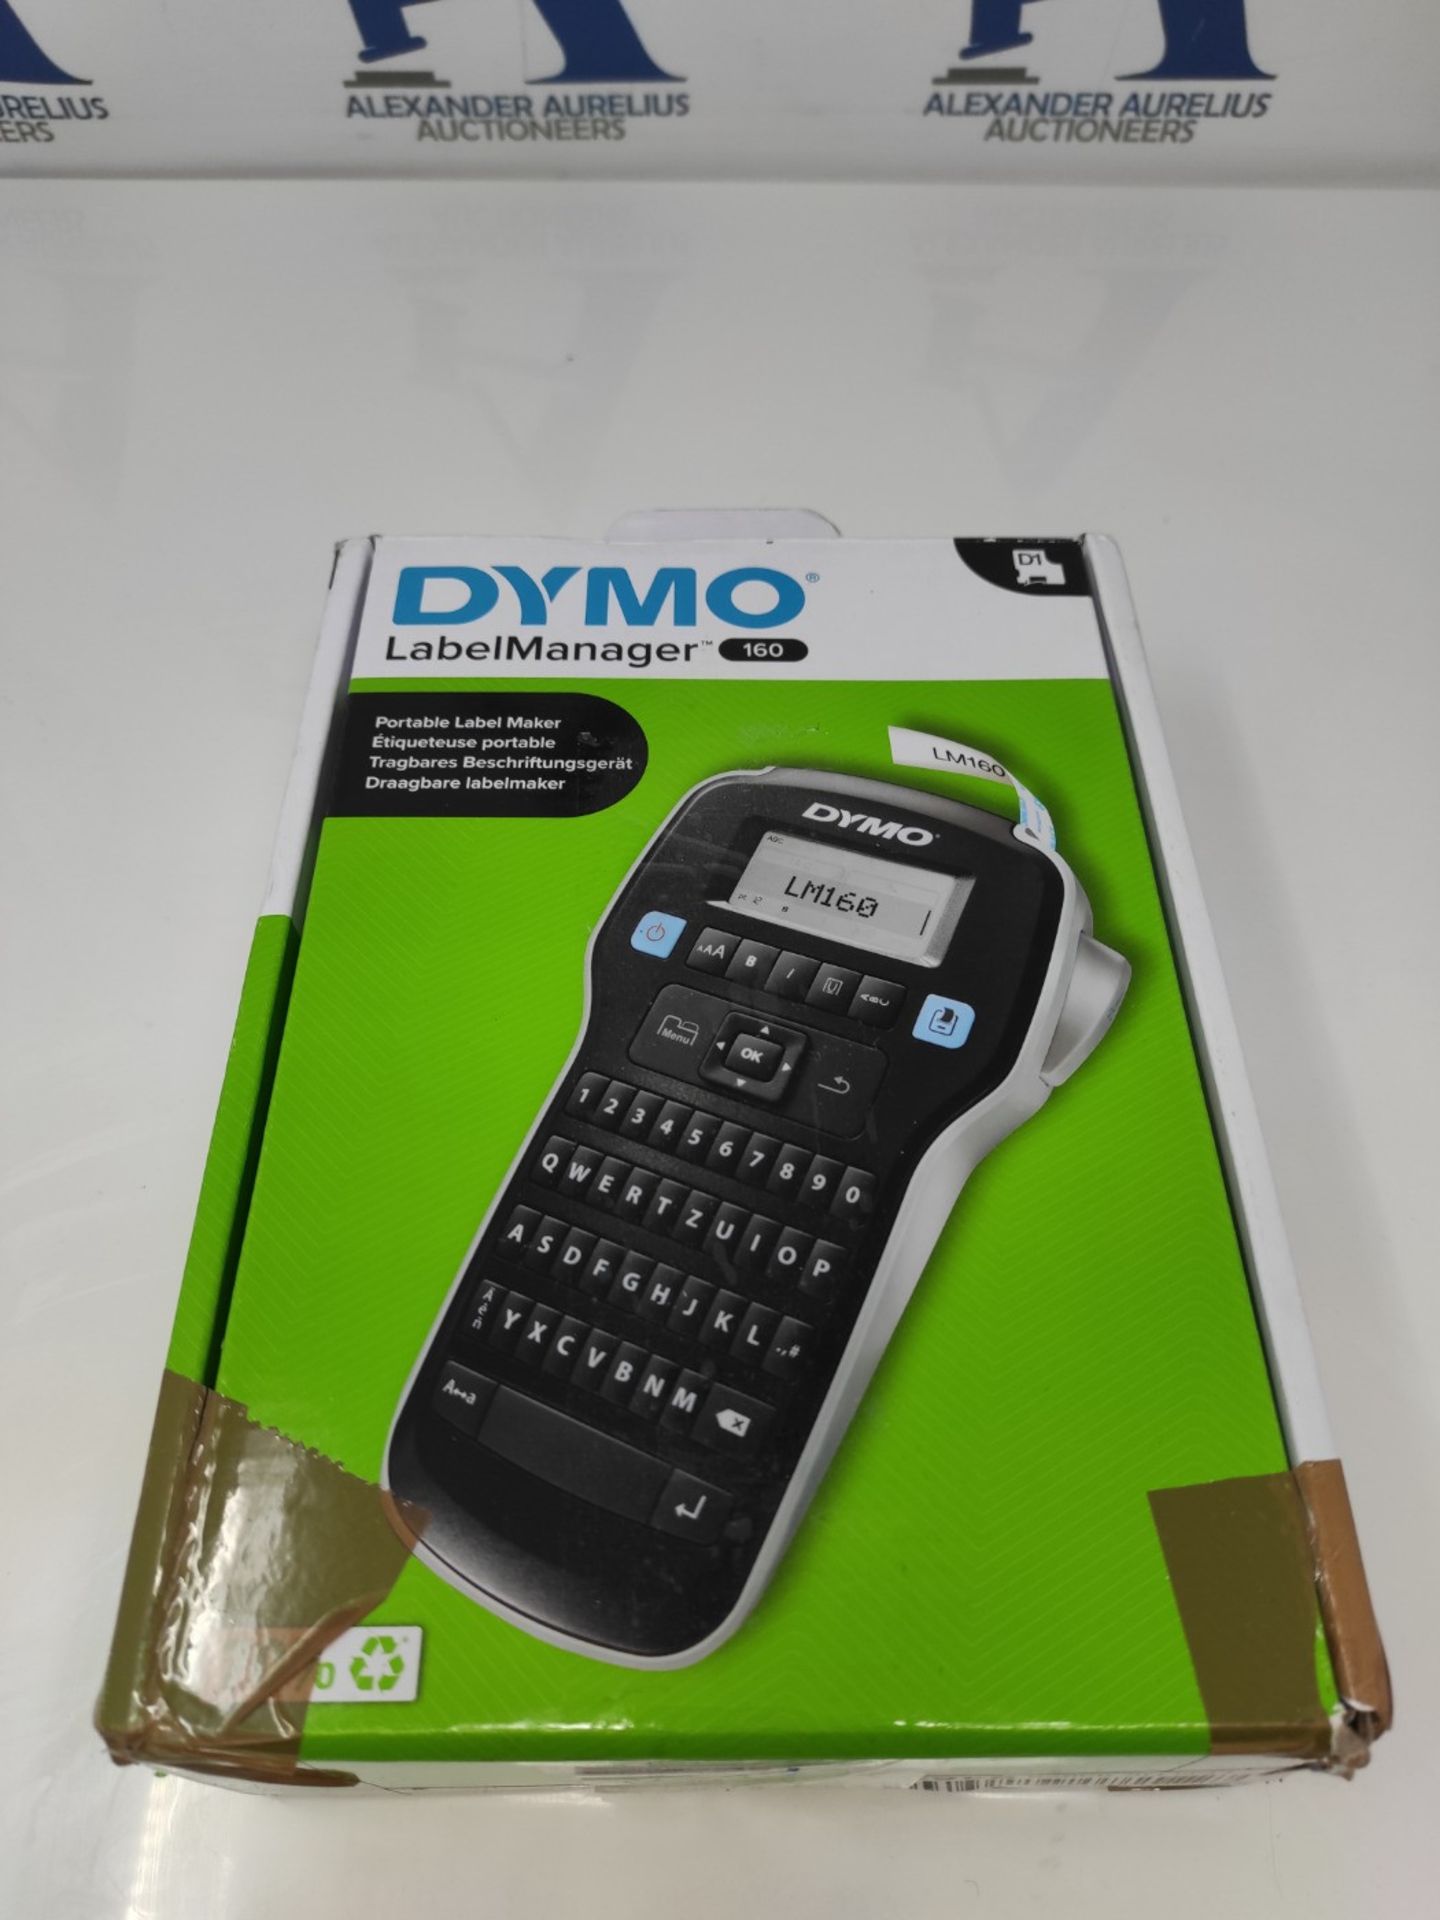 DYMO LabelManager 160 Portable Labeling Device | Labeling device with QWERTZ keyboard - Image 5 of 6